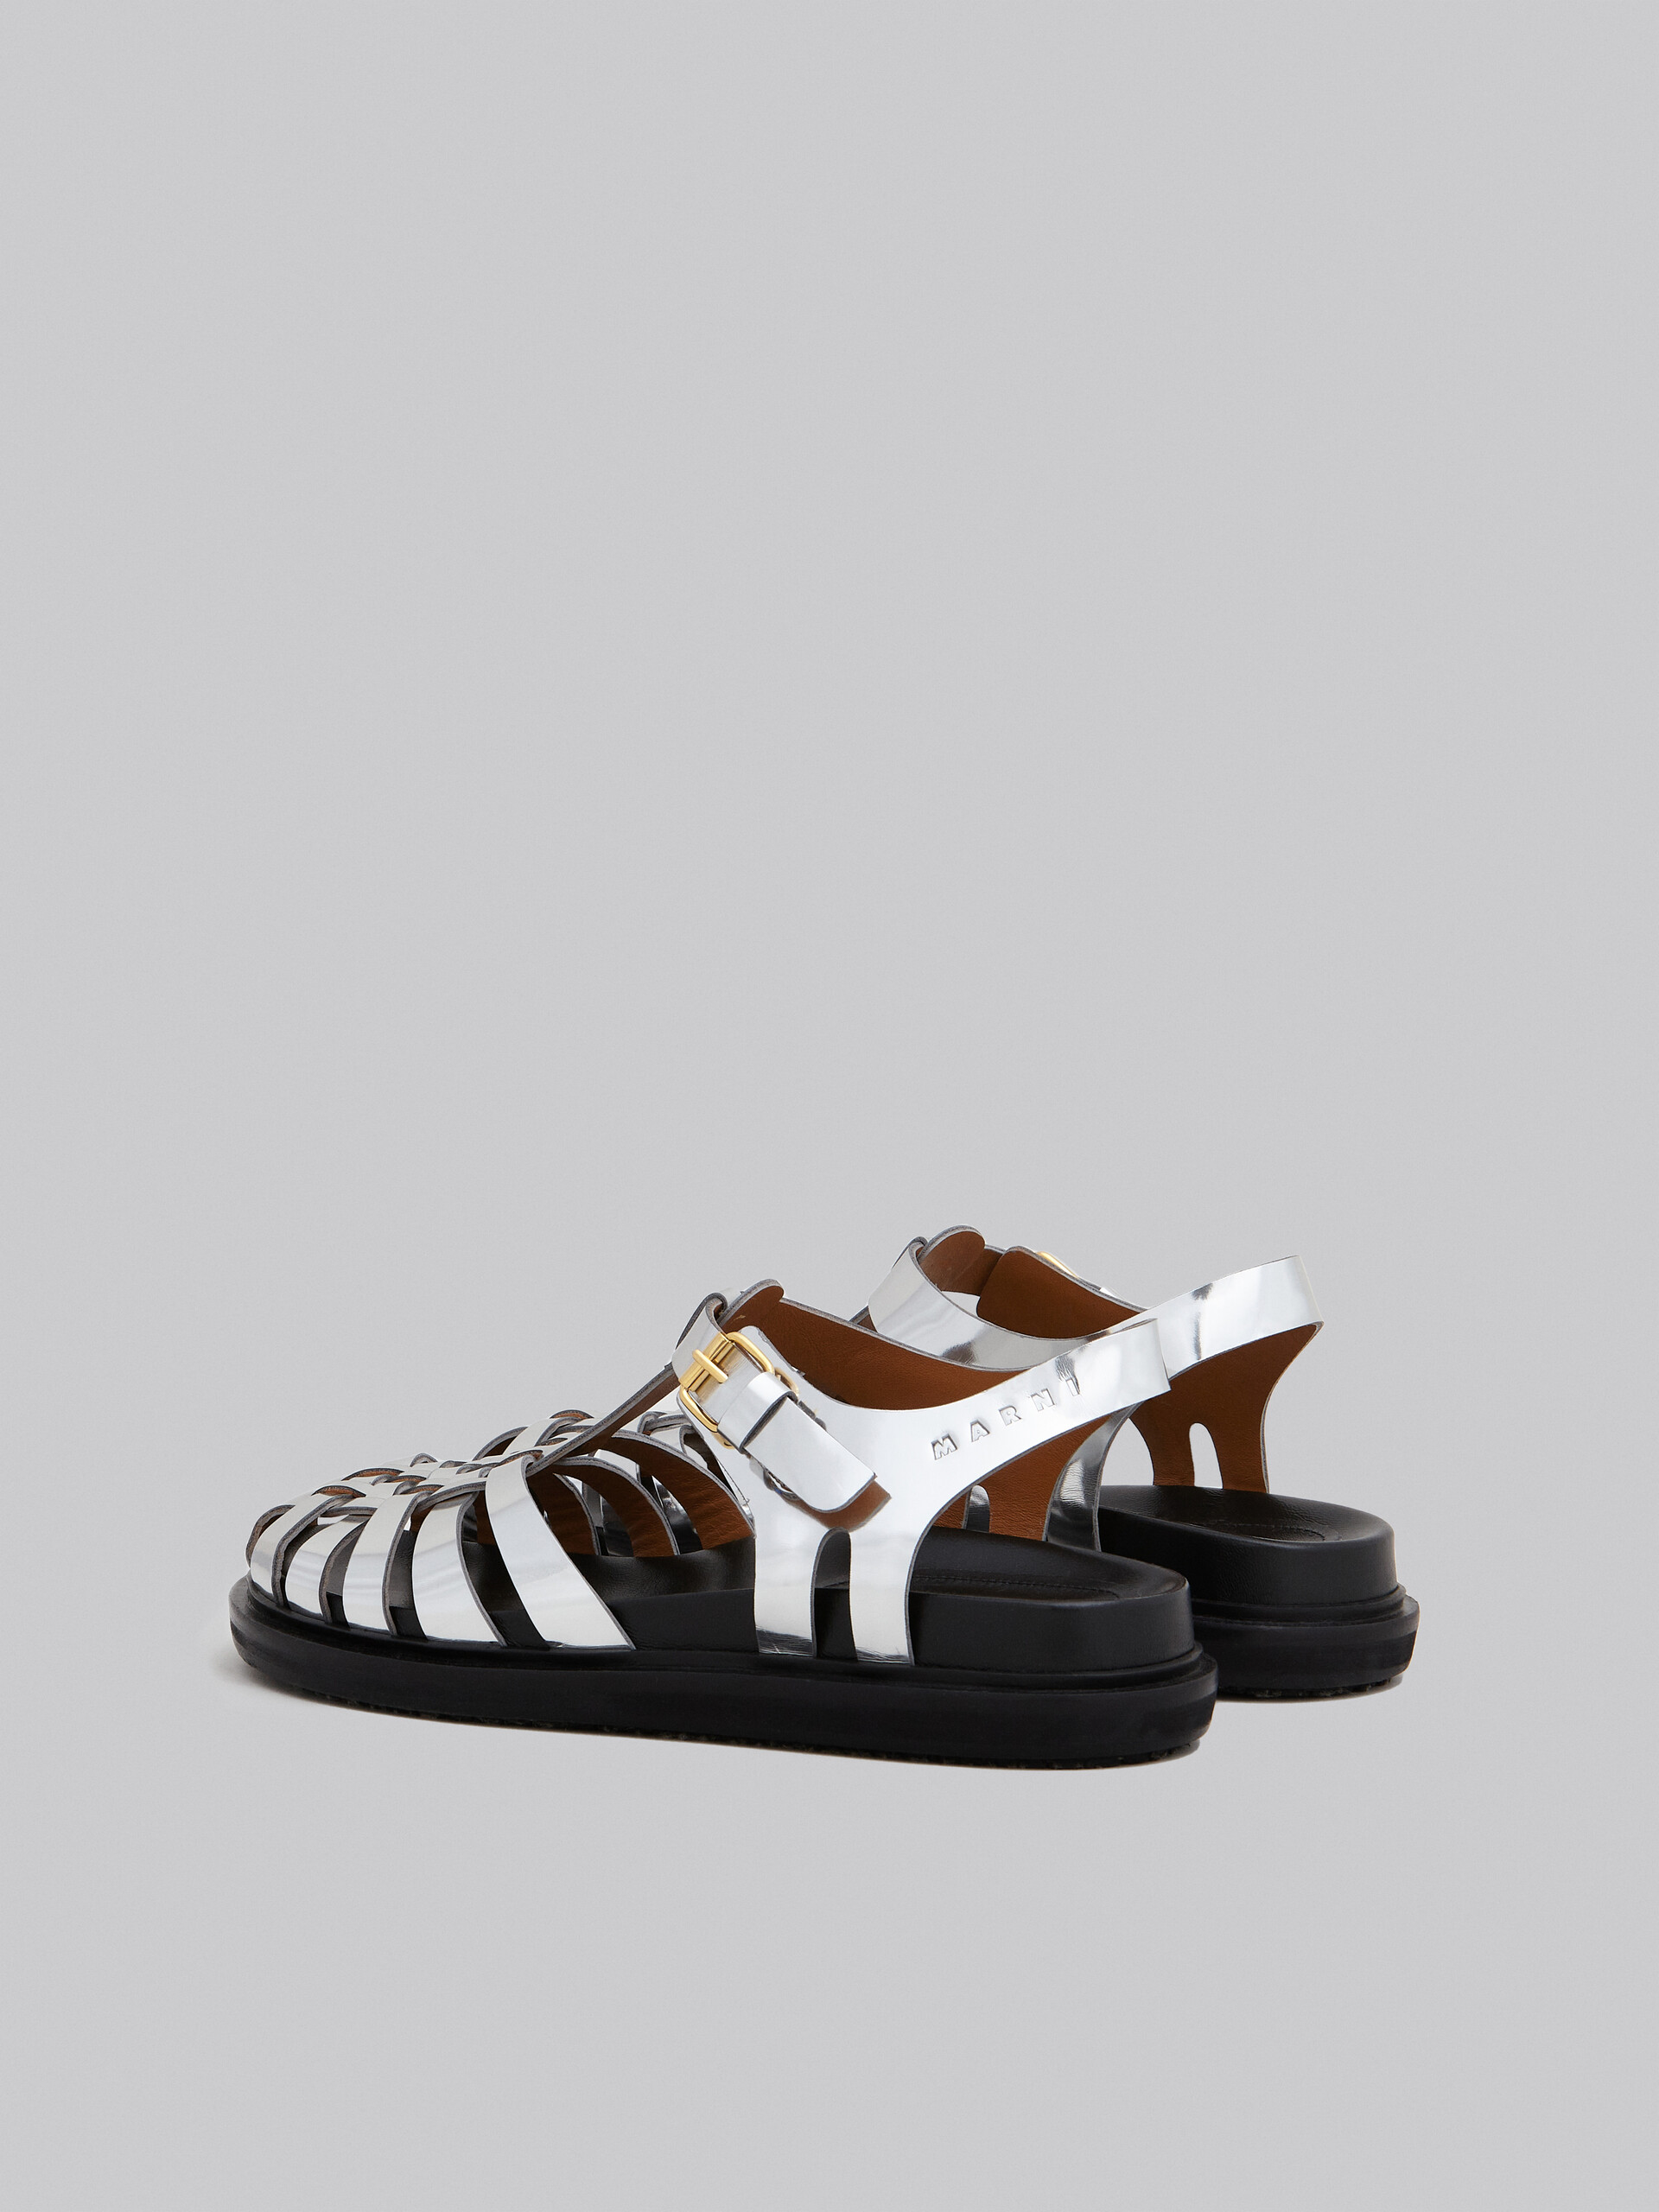 Silver mirrored leather fisherman's sandal - Sandals - Image 3